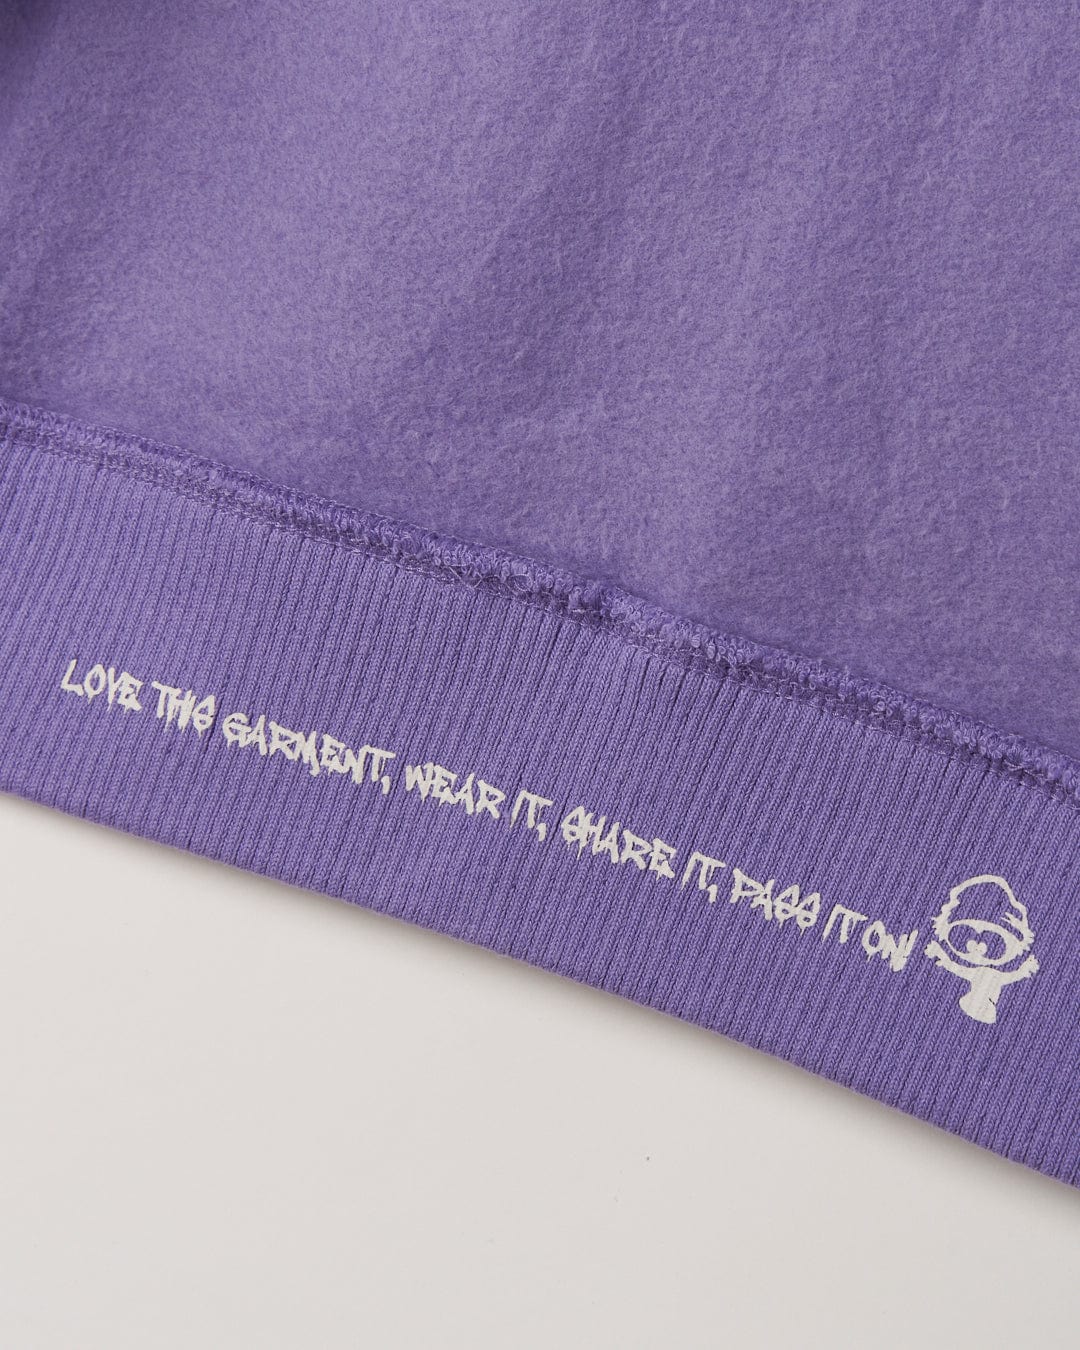 Close-up of a purple fabric with a slogan "love the garment. wear it. share it. pass it on" embroidered along the seam, accompanied by a small white Saltrock branded logo on the No Road No Problem - Recycled Kids Zip Hoodie - Purple.